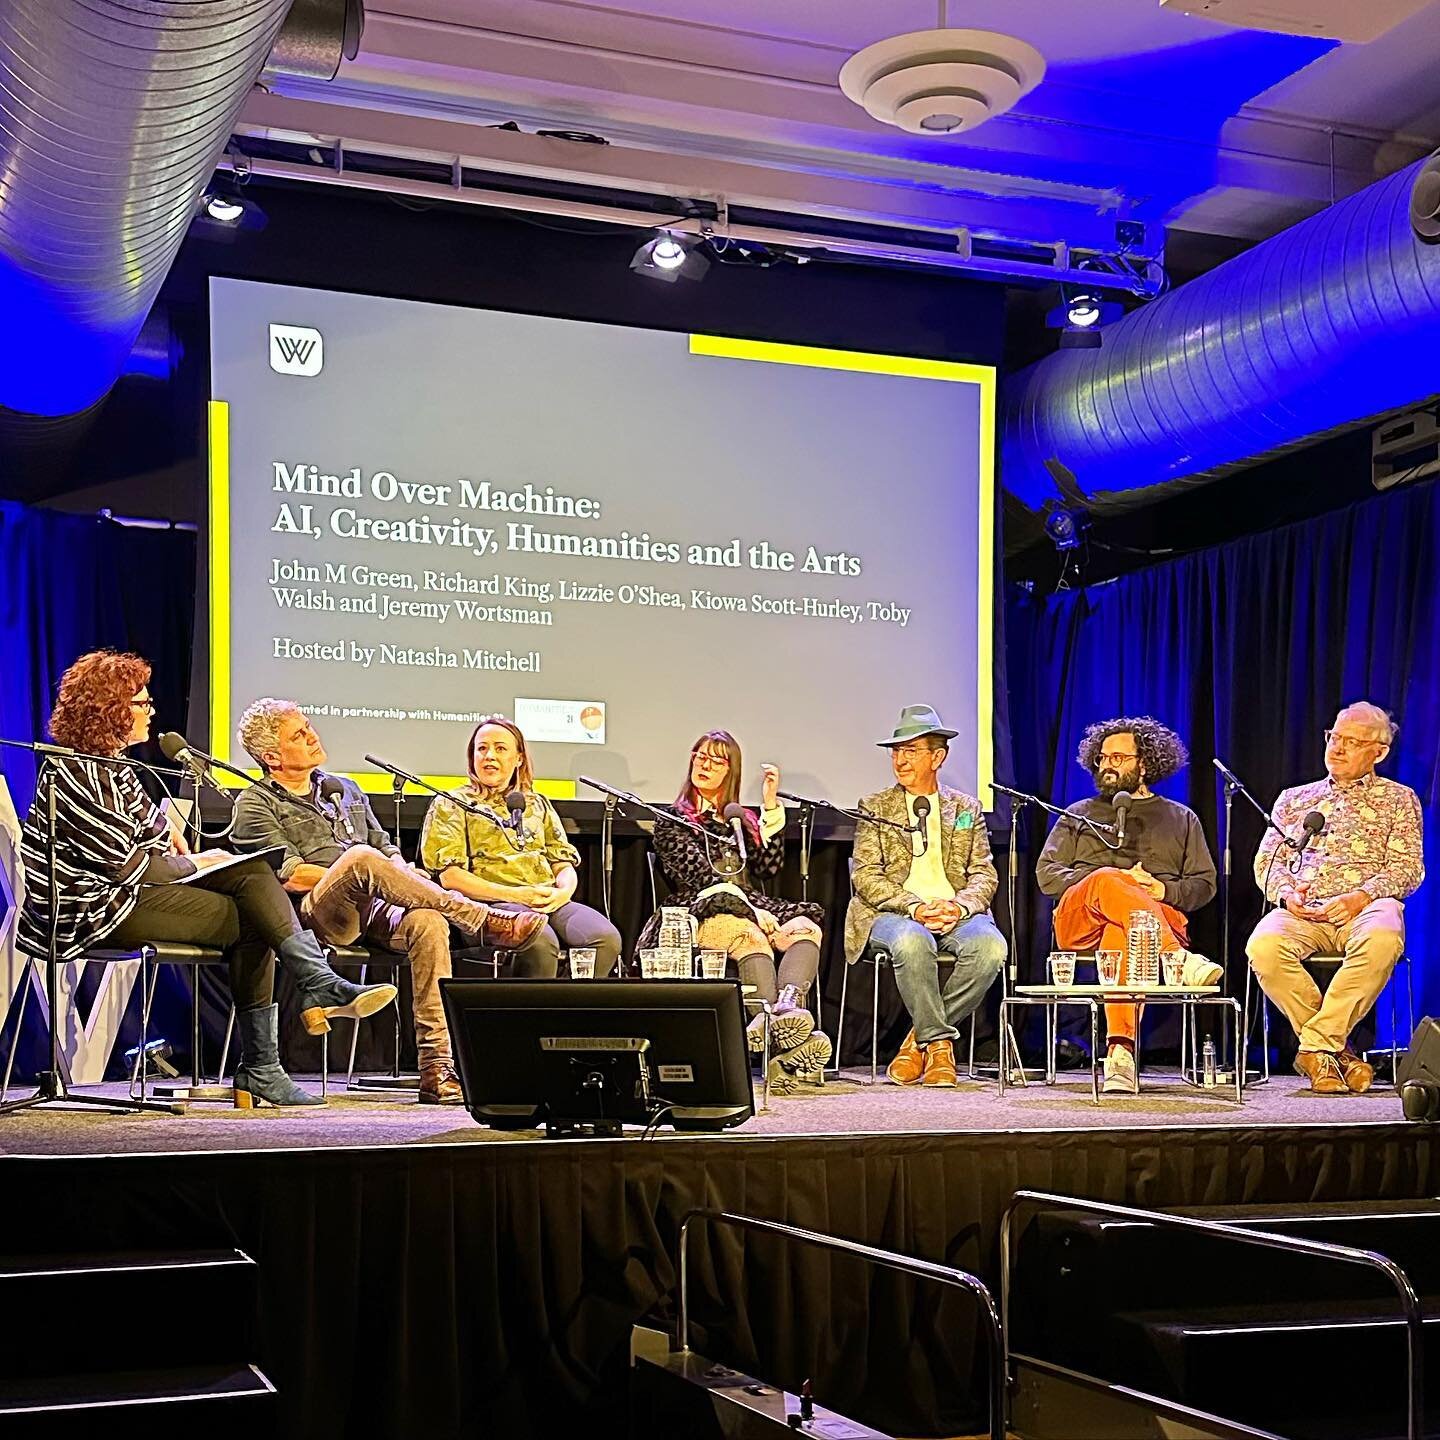 The full podcast of our &lsquo;Mind Over Machine: AI, Creativity, Humanities and the Arts&rsquo; event presented in partnership with @wheelercentre and ABC Radio National&rsquo;s Big Ideas programme is now available on the ABC Listen app. Link in bio